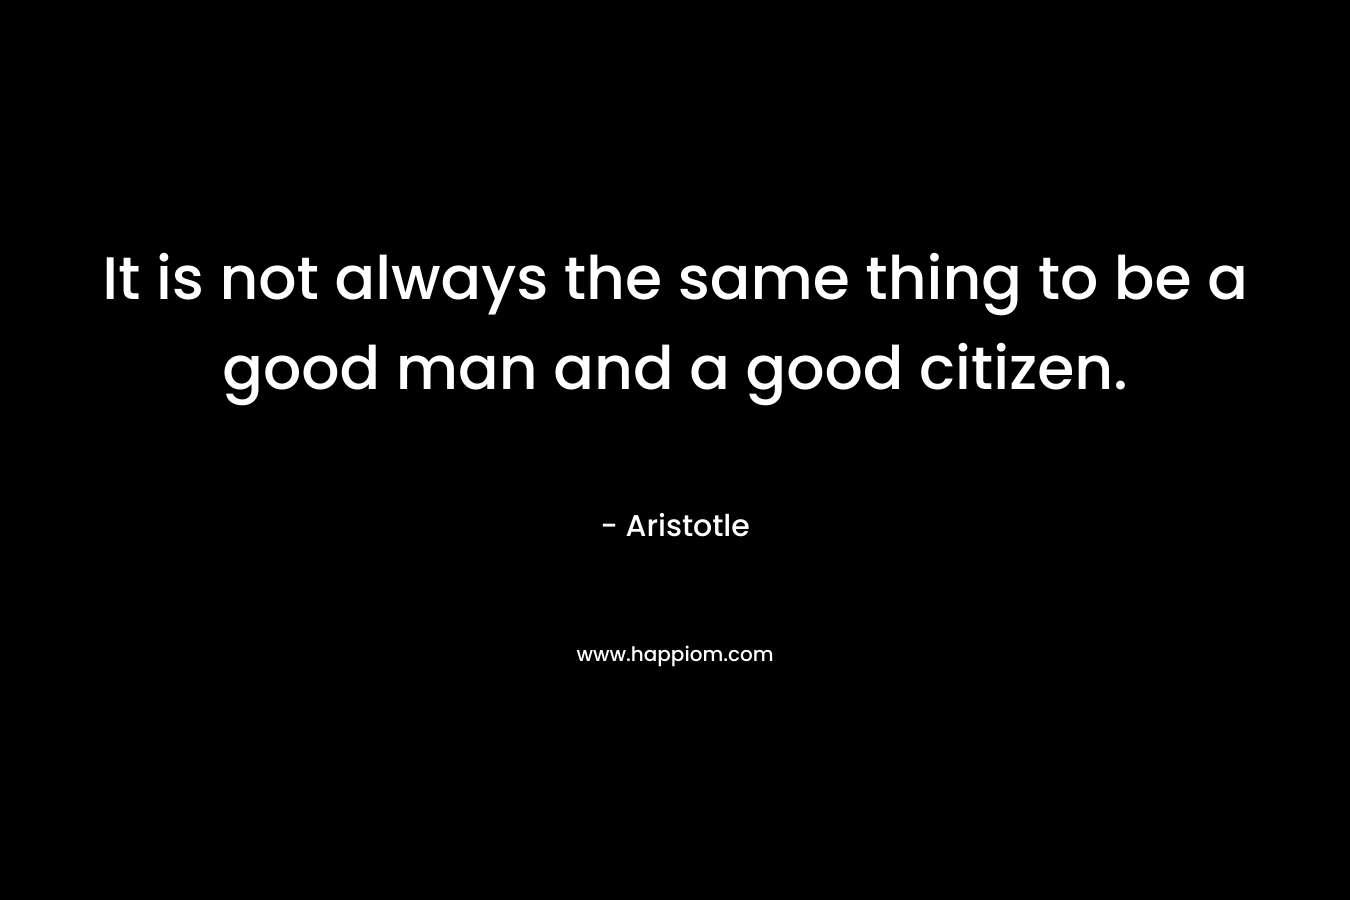 It is not always the same thing to be a good man and a good citizen. – Aristotle